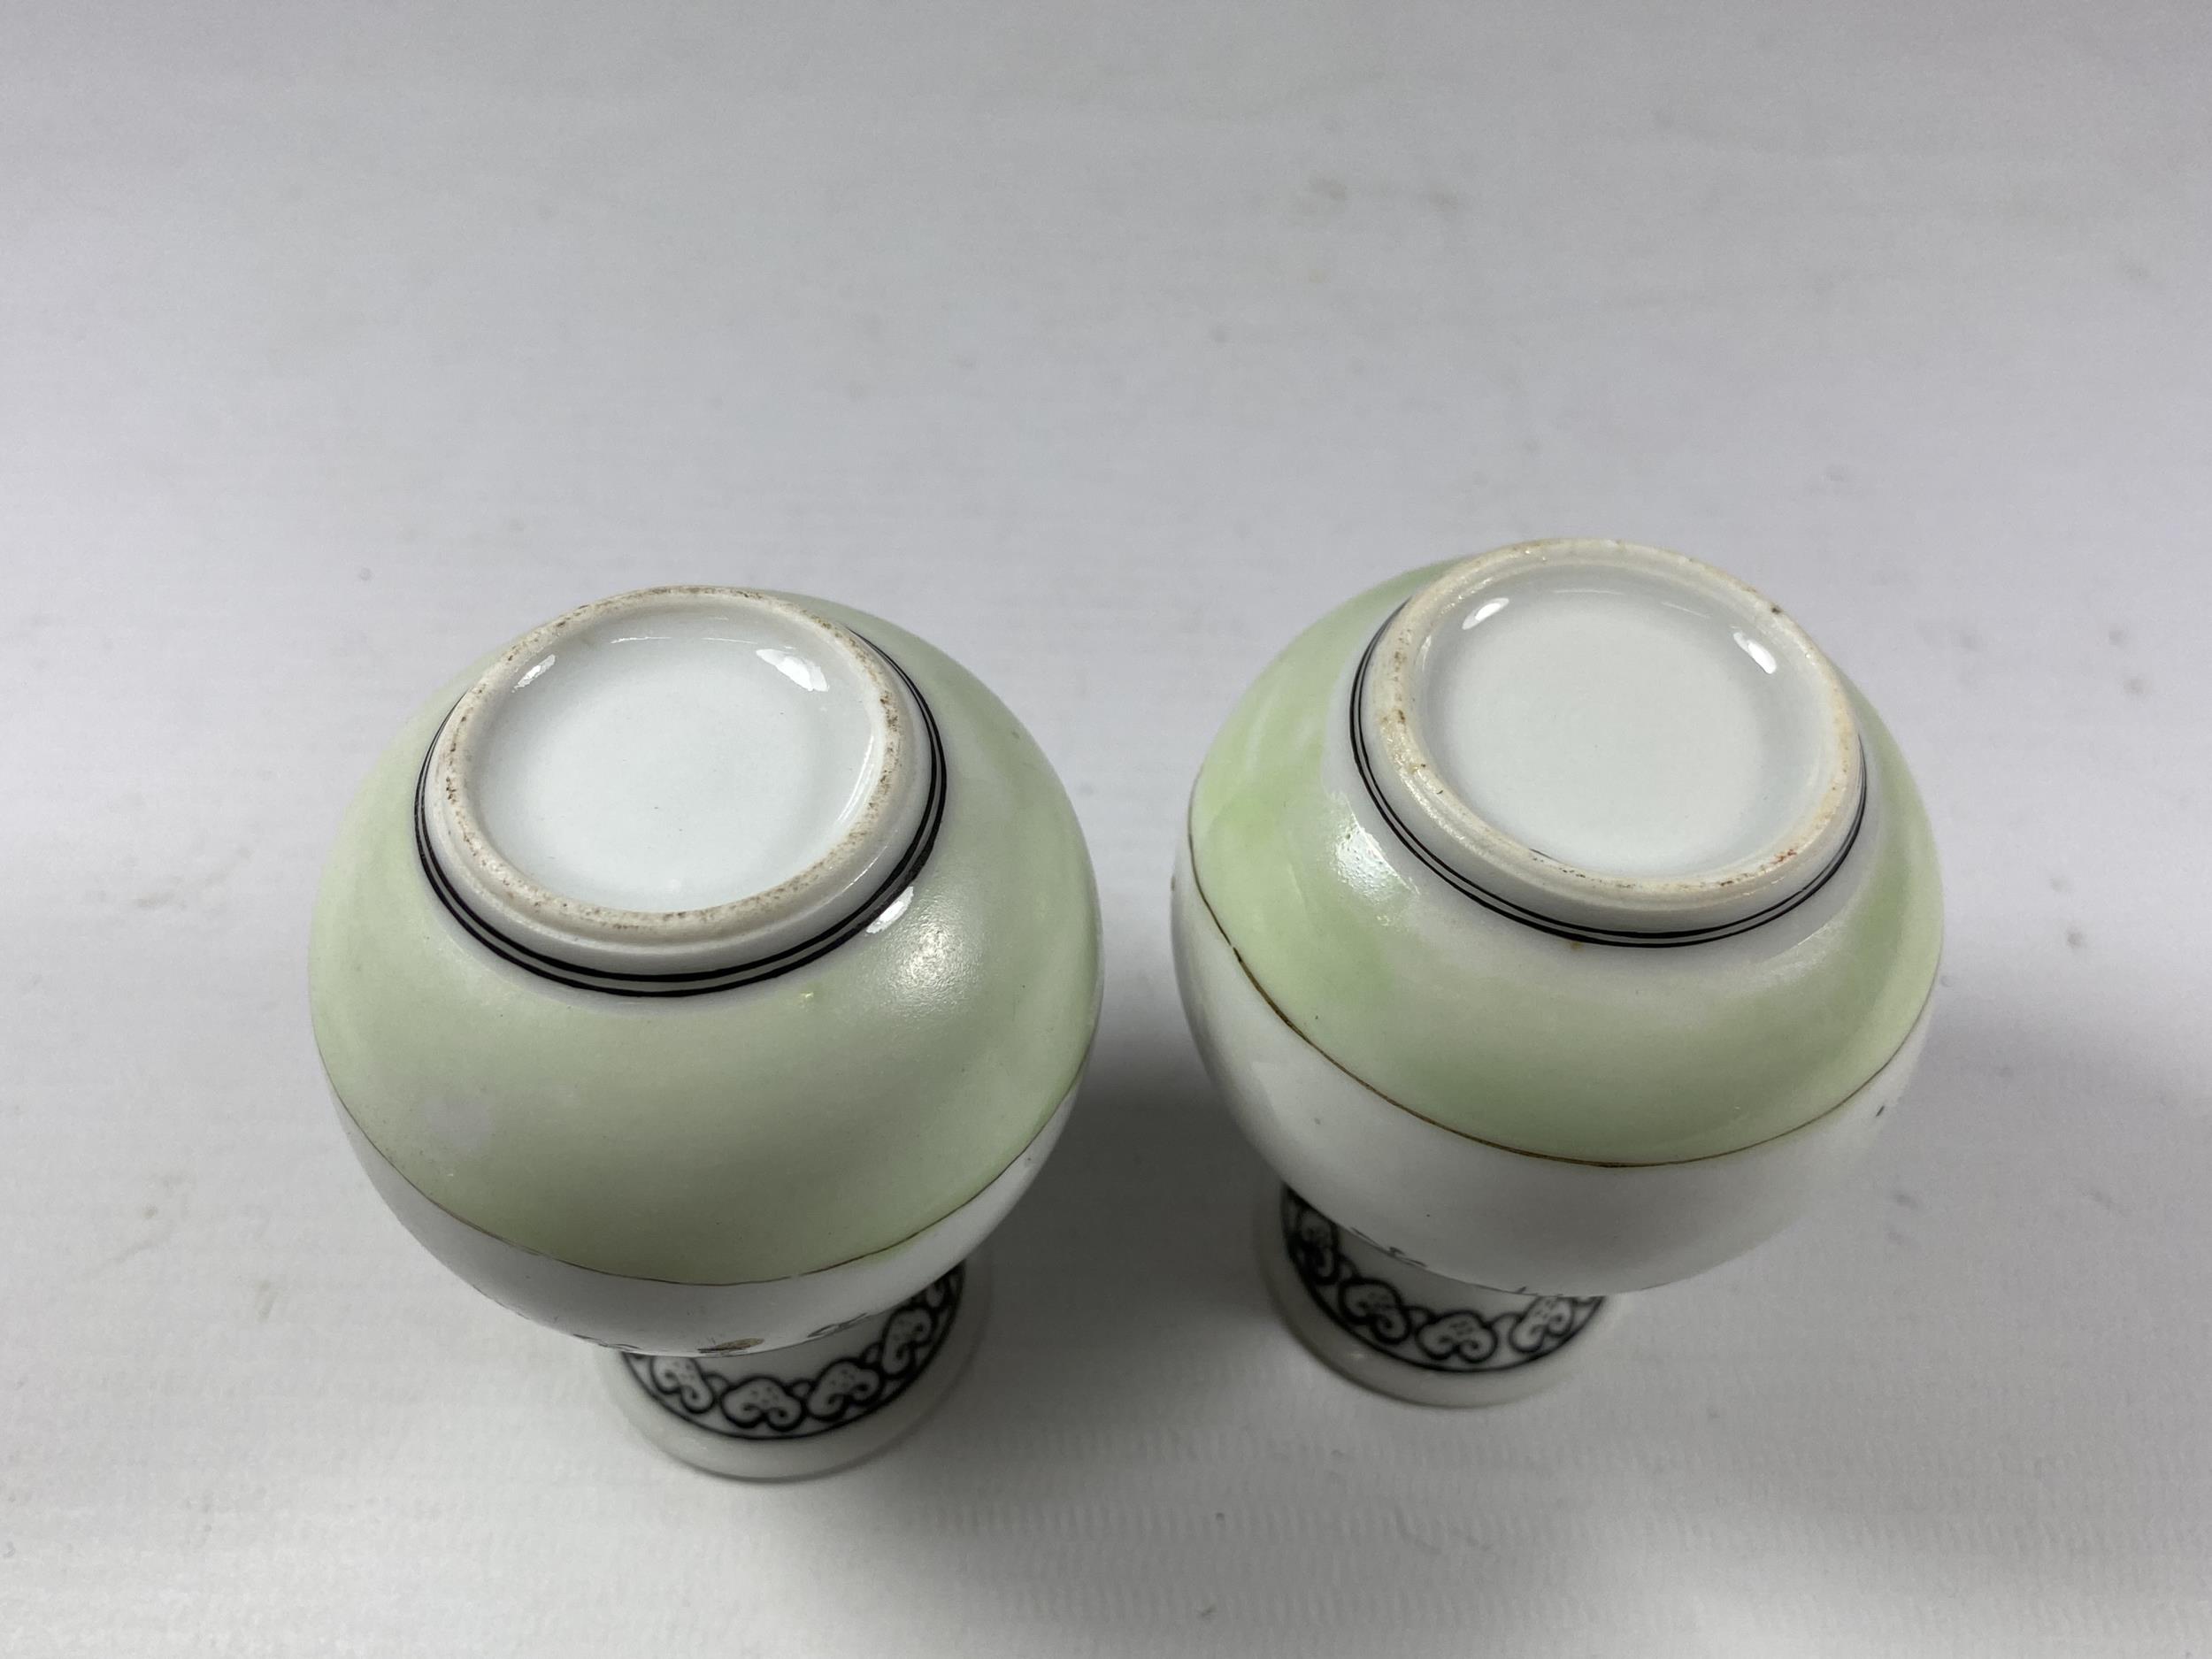 A PAIR OF MINIATURE CHINESE PORCELAIN BOTTLE VASES WITH CALLIGRAPHY DESIGN, HEIGHT 7.5CM - Image 3 of 4